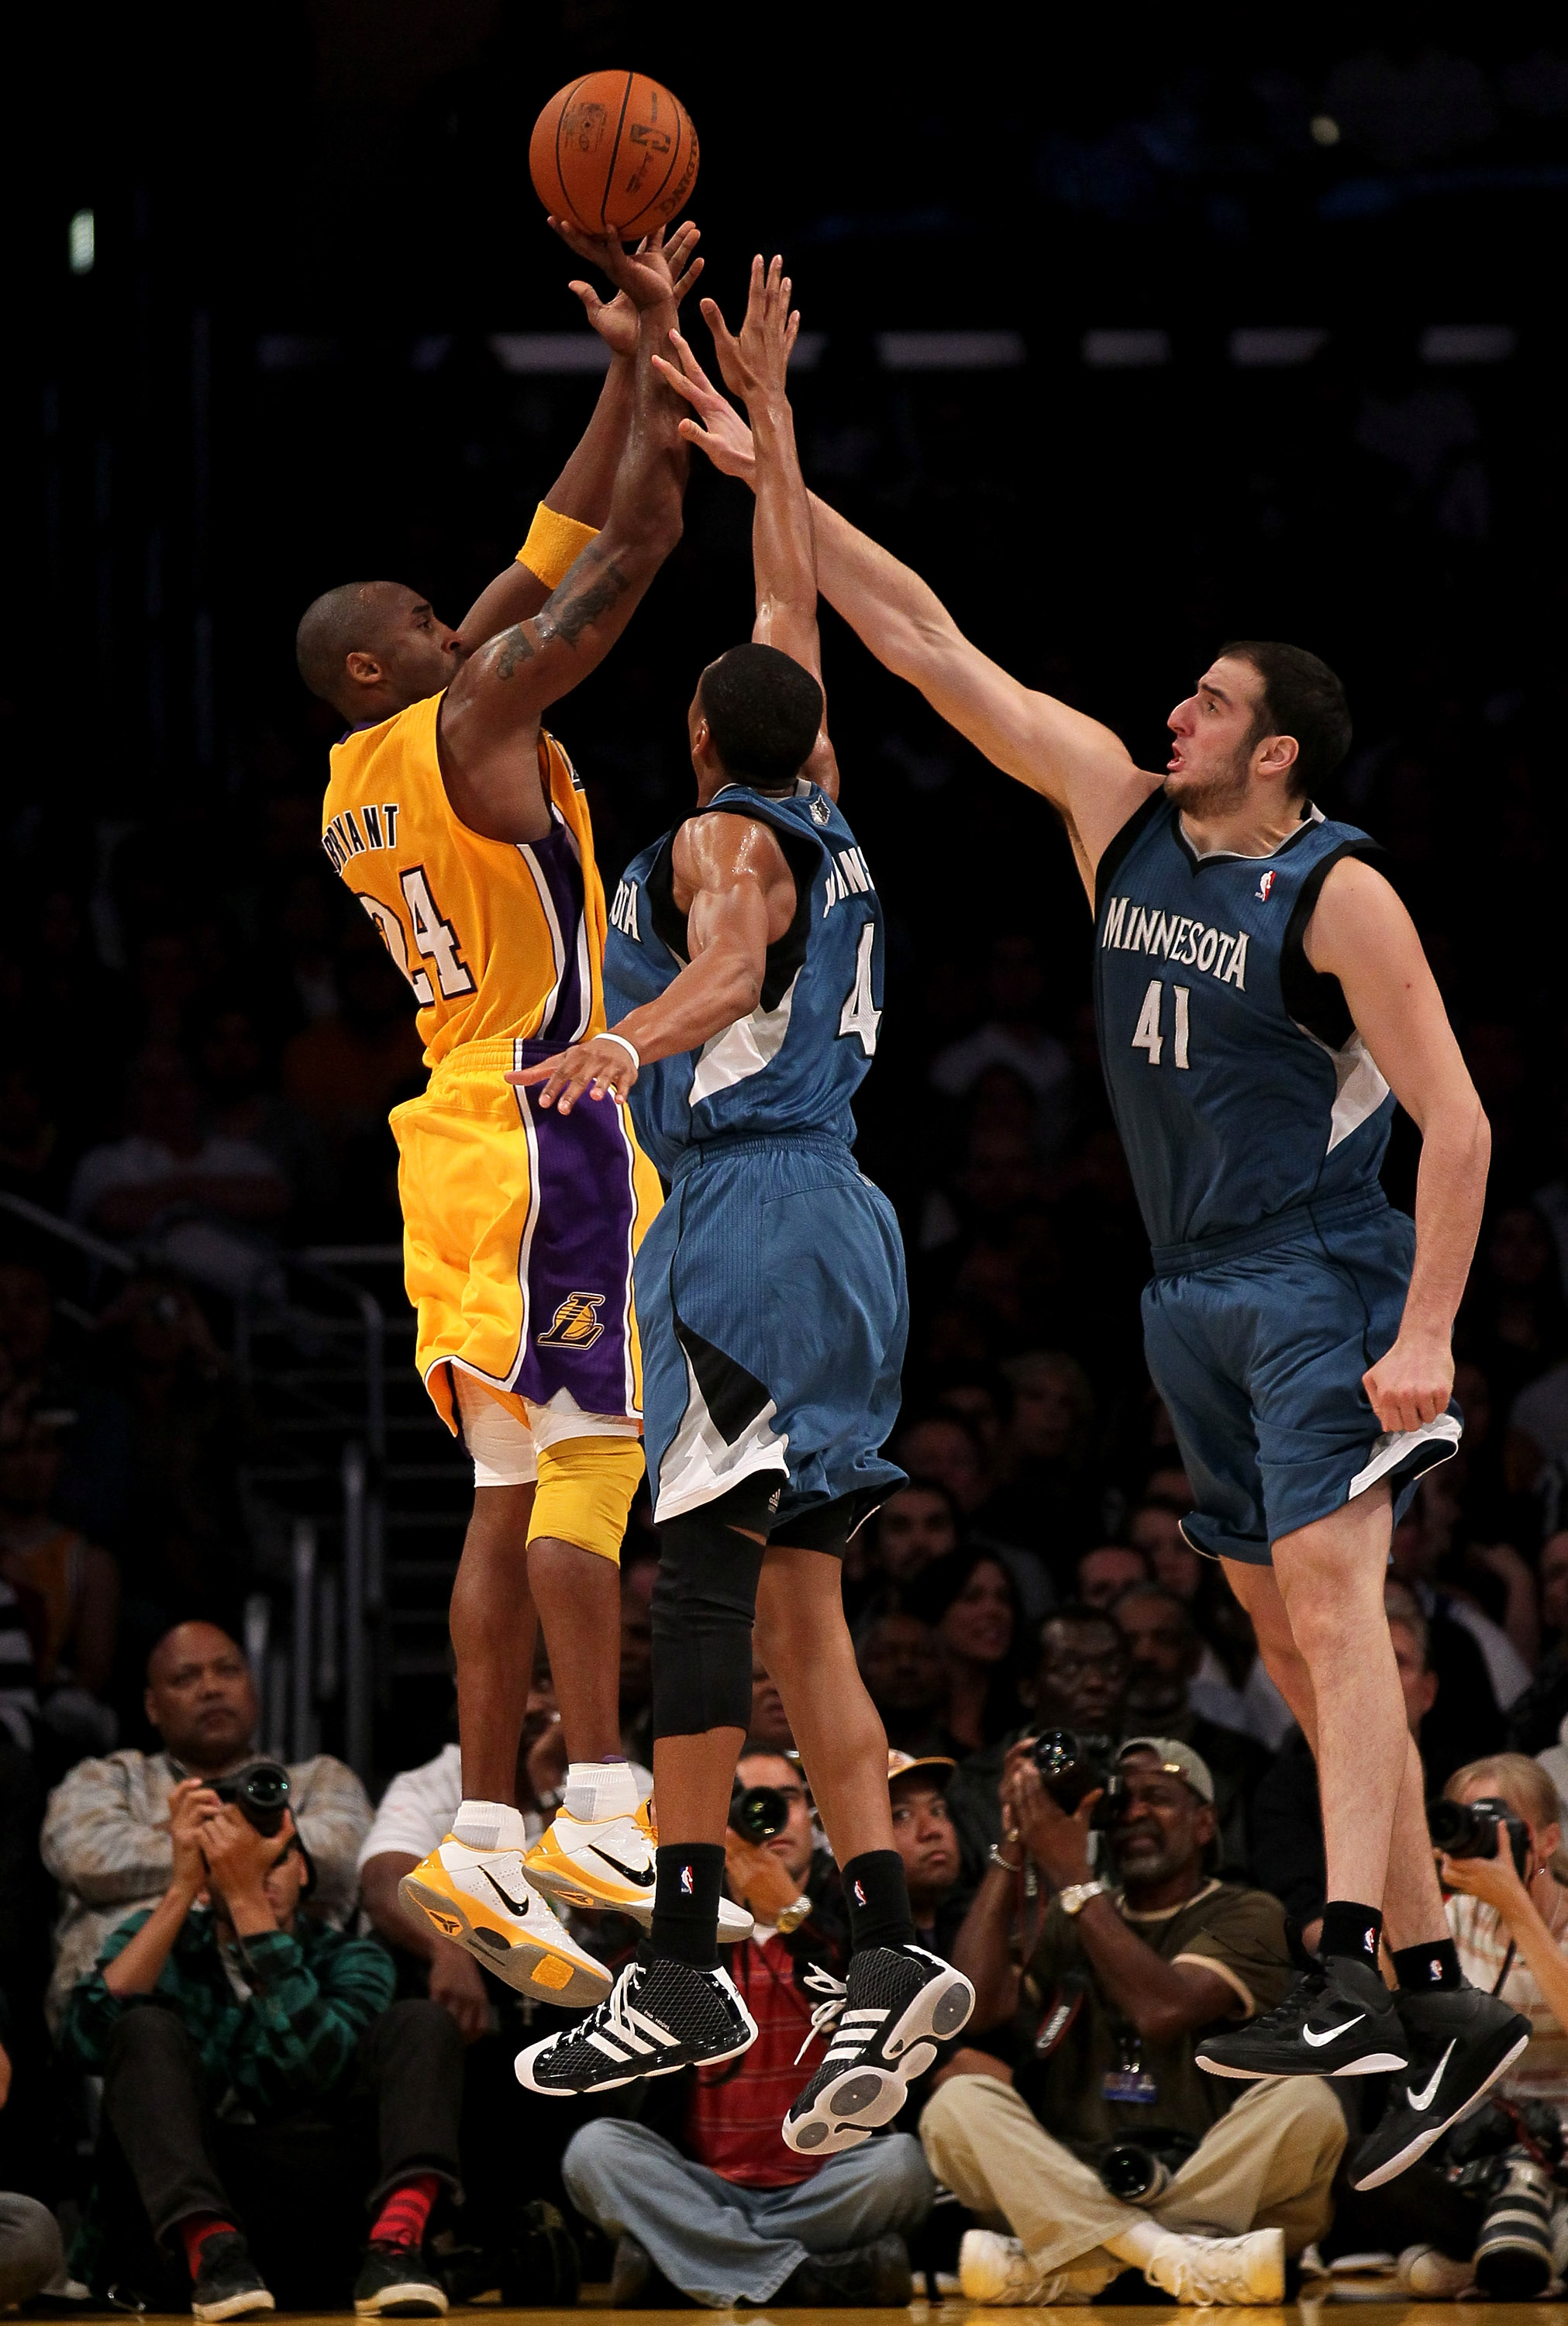 LOS ANGELES, CA - NOVEMBER 09:  Kobe Bryant #24 of the Los Angeles Lakers shoots over Wes Johnson #4 and Kosta Koufos #41 of the Minnesota Timberwolves at Staples Center on November 9, 2010 in Los Angeles, California.  The Lakers won 99-94.  NOTE TO USER: